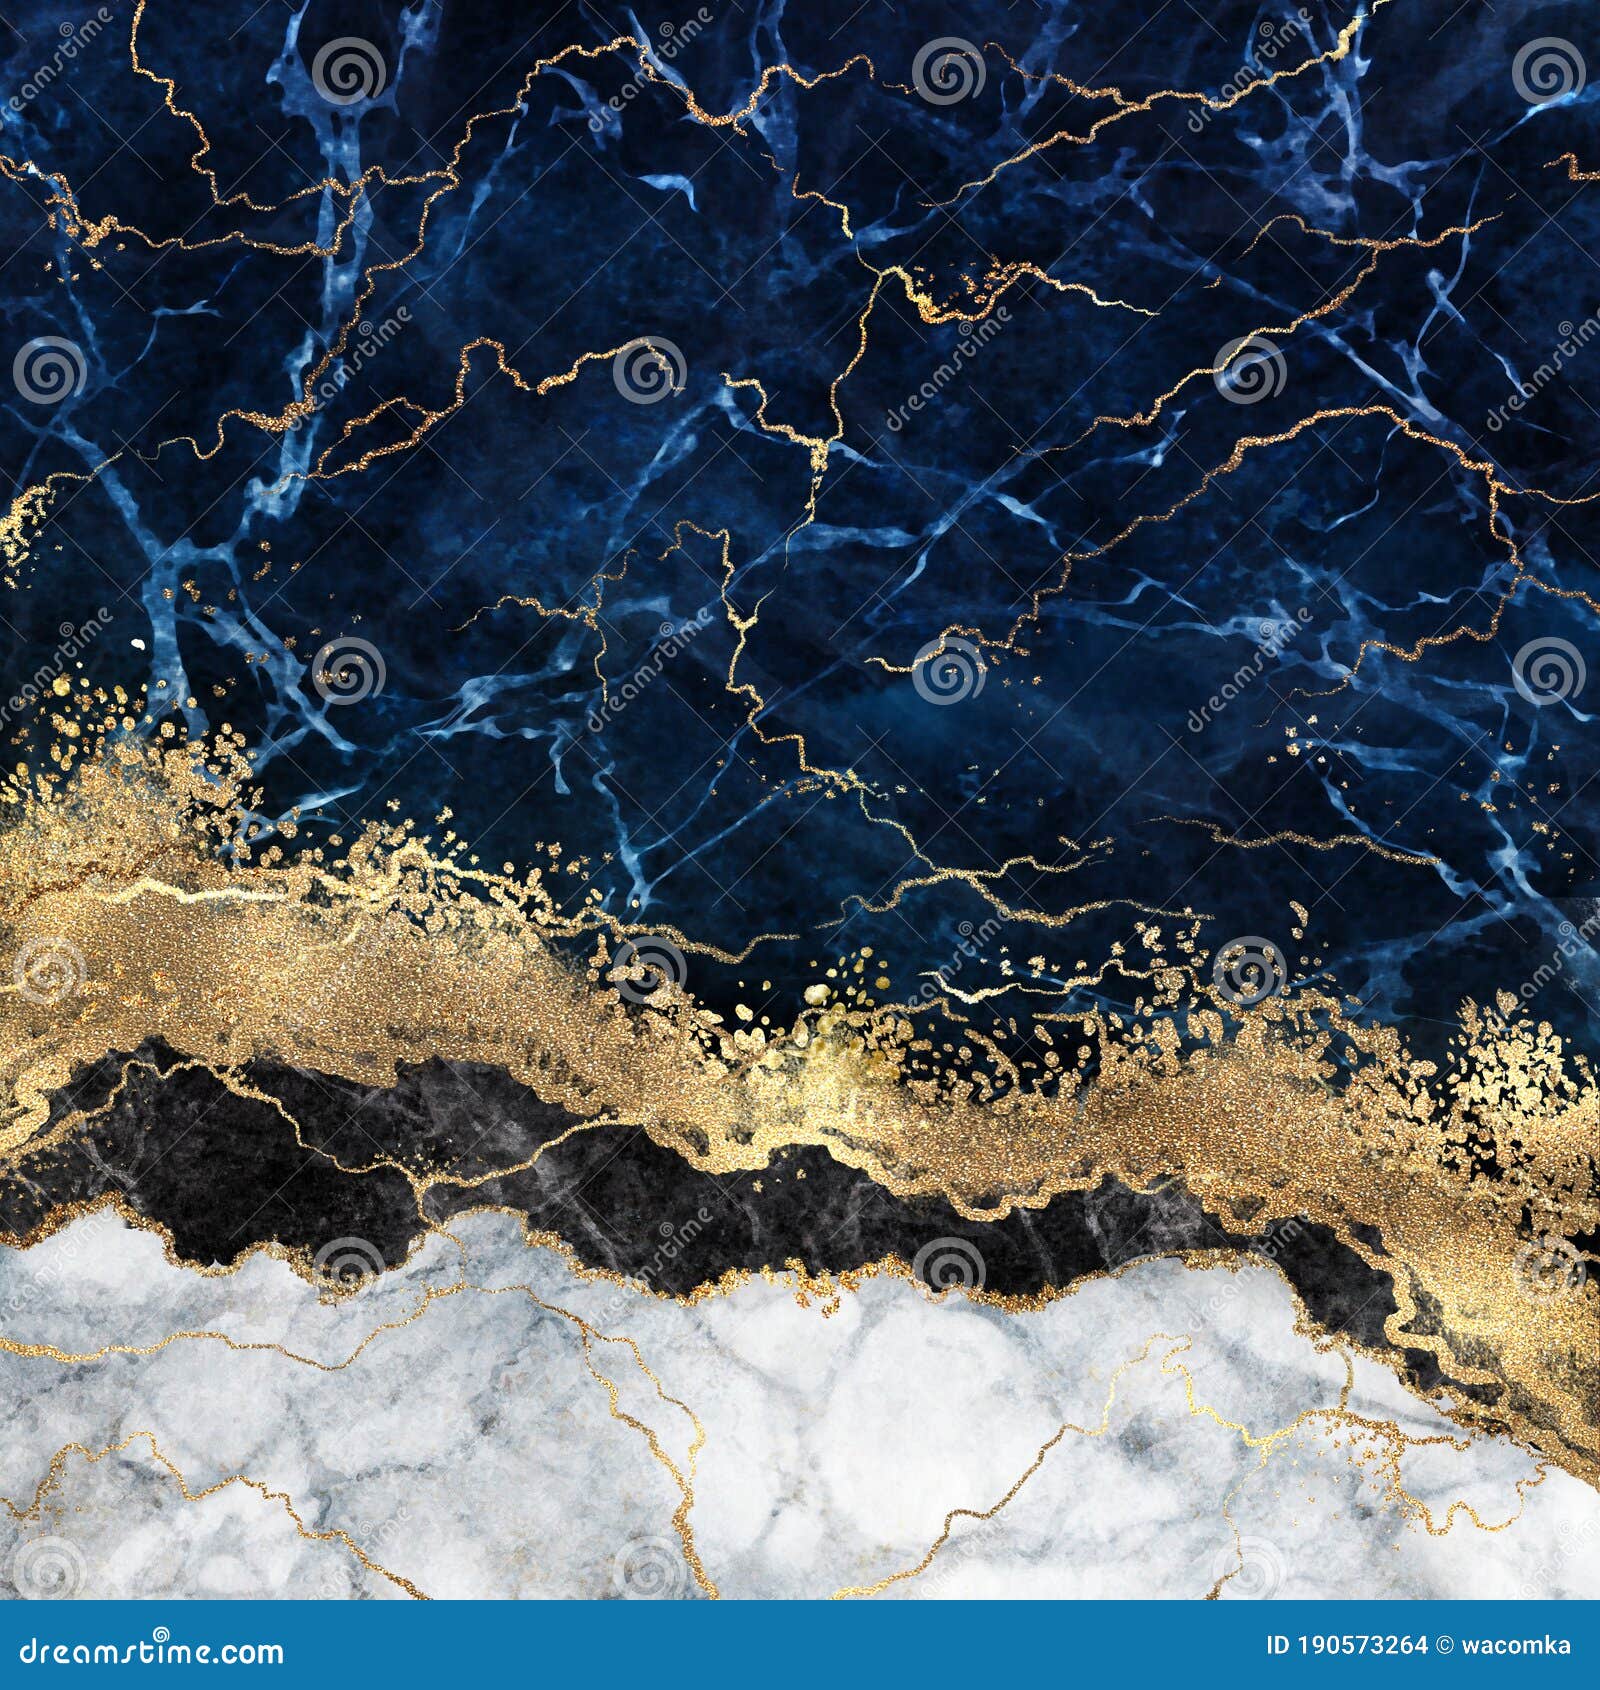 Marble Blue Gold Background Images  Free Photos PNG Stickers Wallpapers   Backgrounds  rawpixel